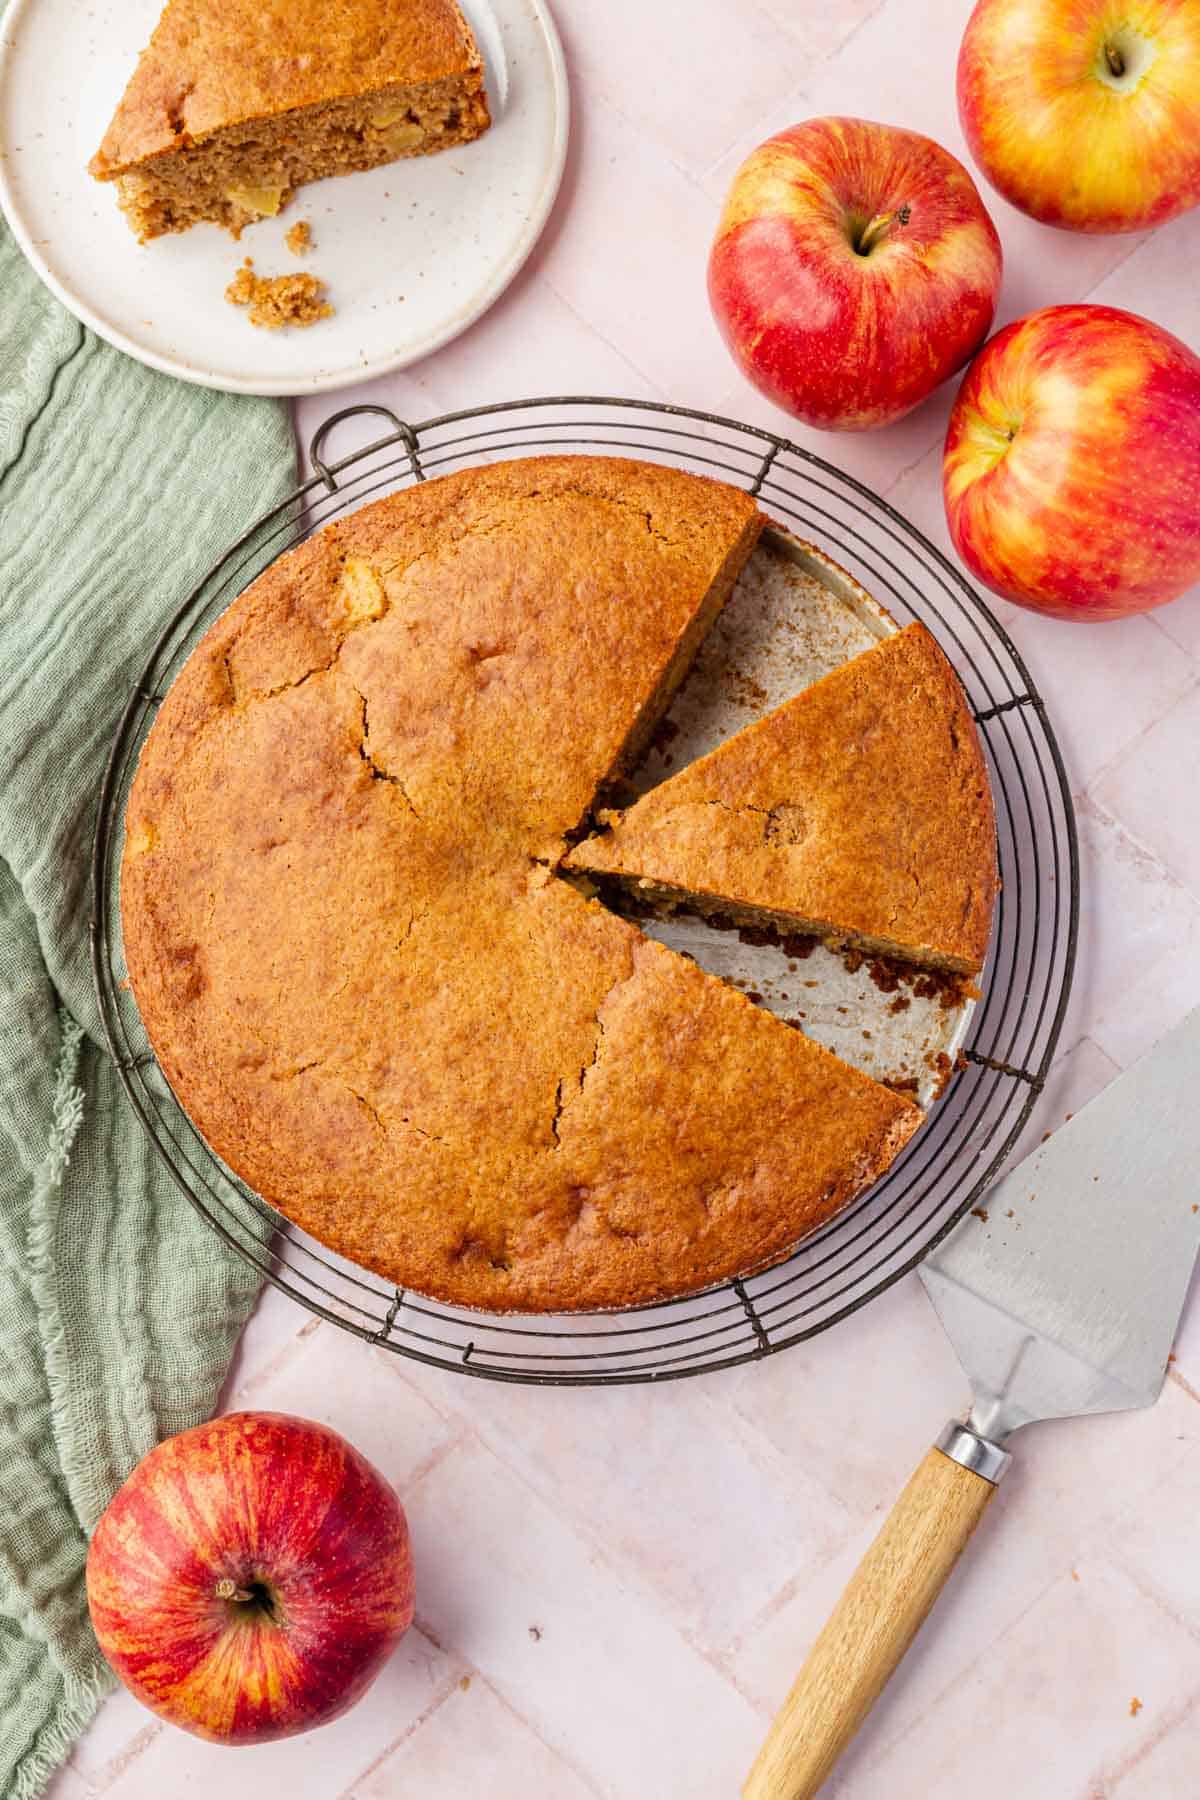 An overhead view of a round single-layer gluten-free apple cake with one slice cut from the cake.